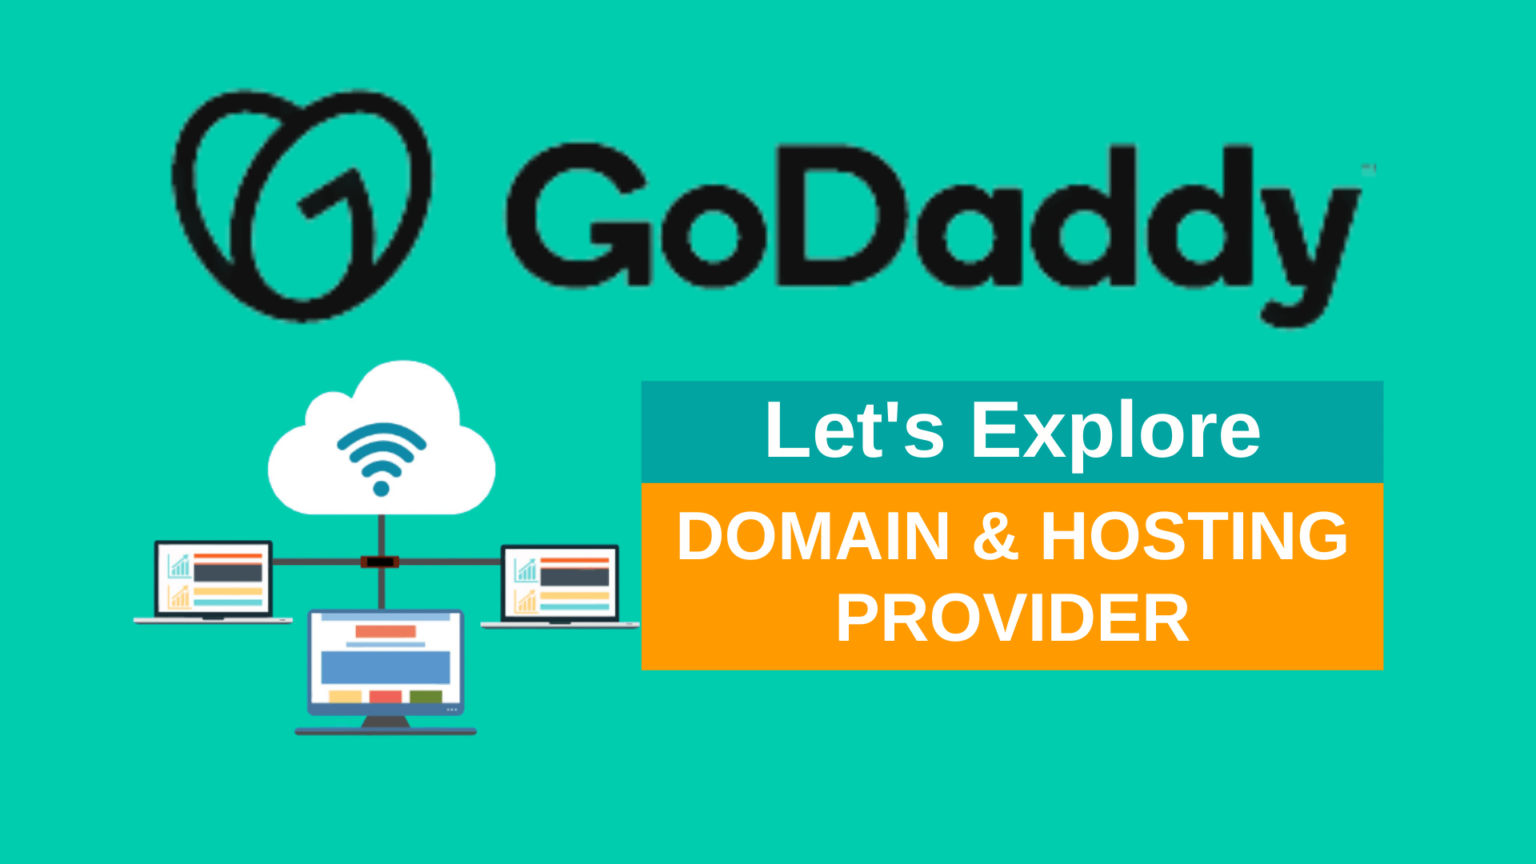 godaddy – the web hosting and domain provider